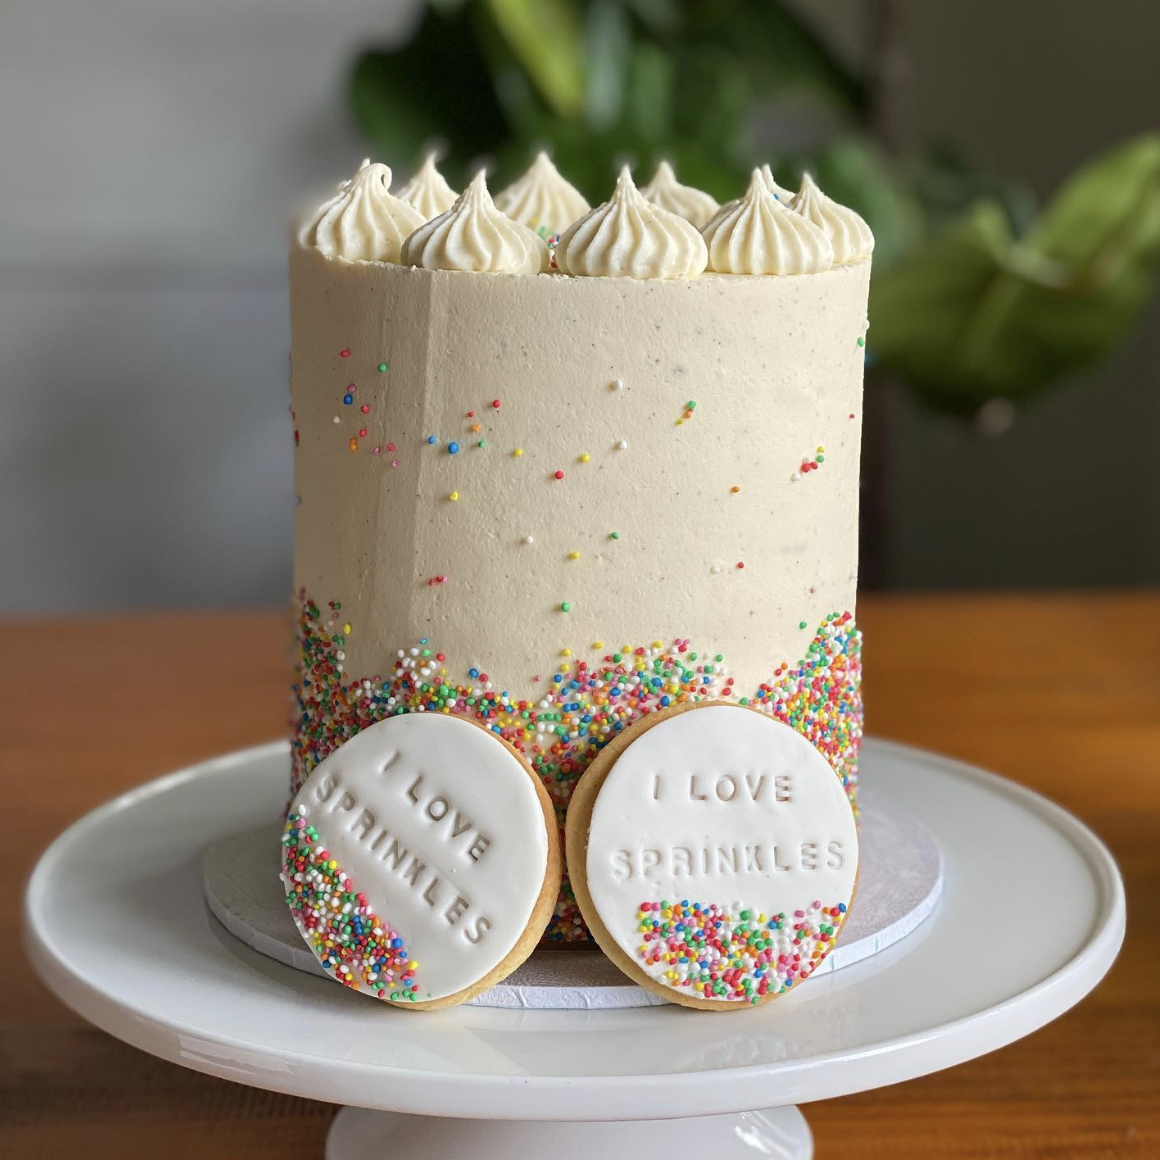 Celebration cakes – Yum with Love